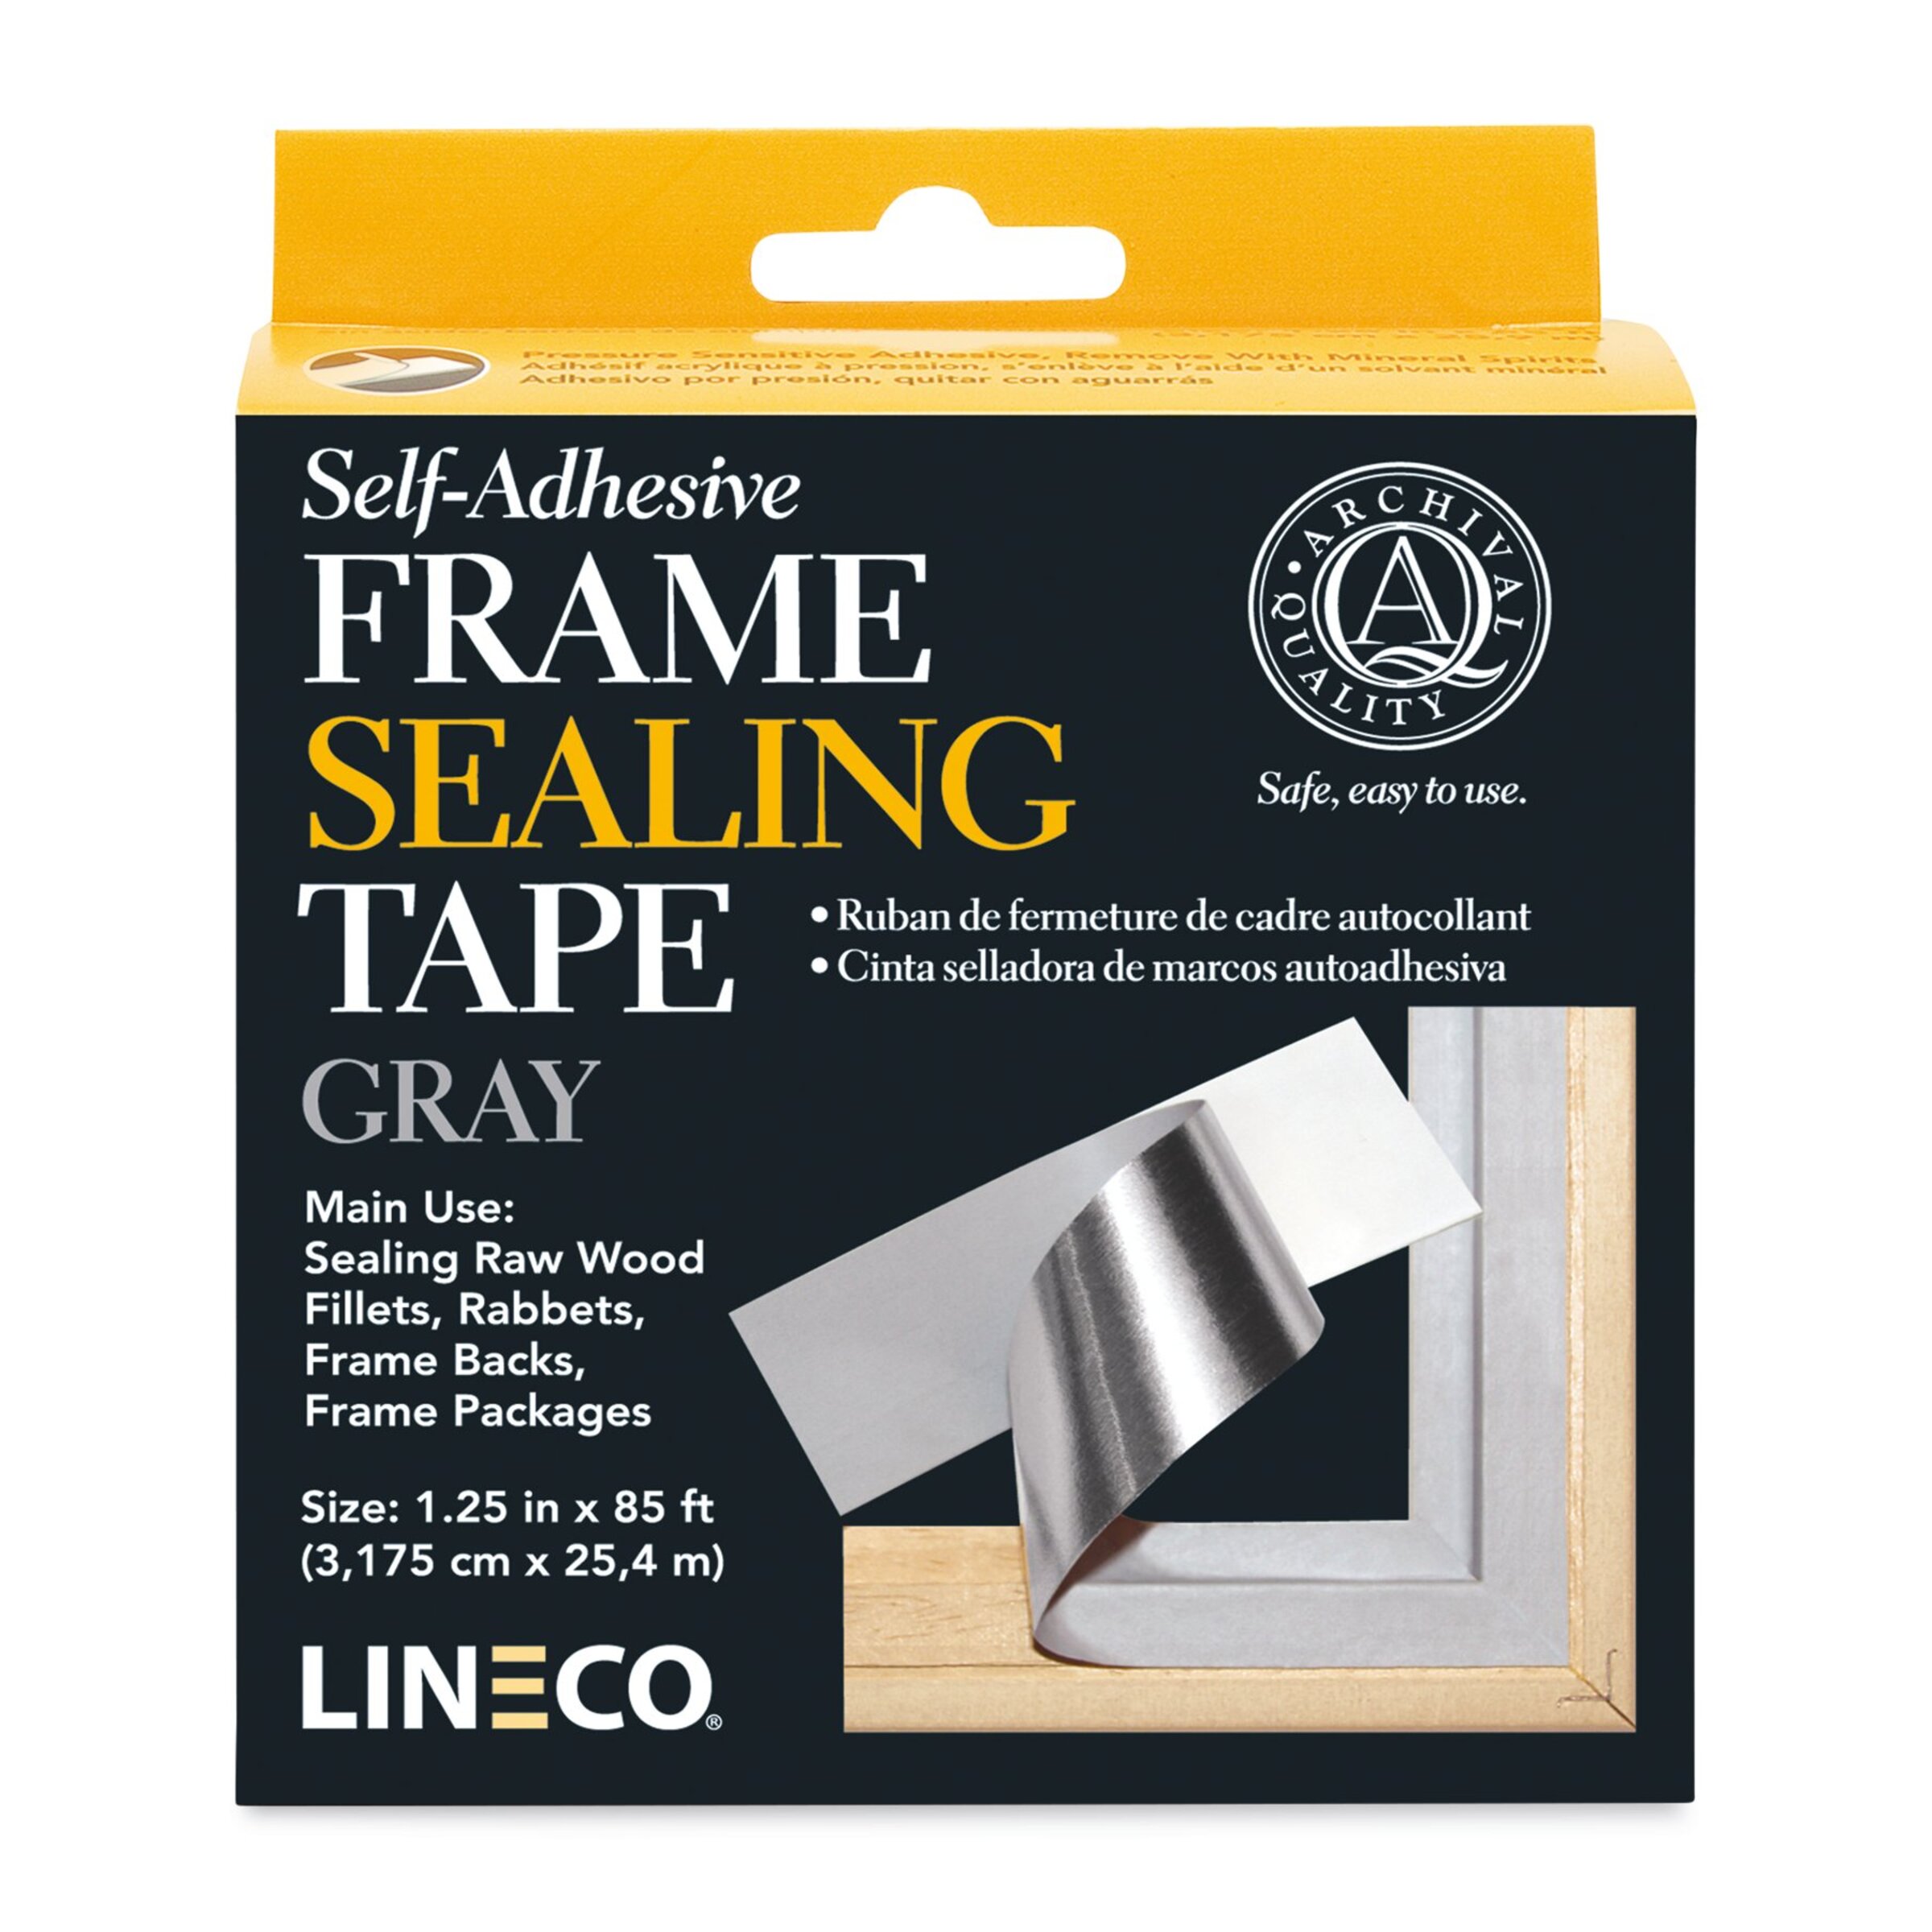 Get a quote - Thin tape - Business Procurement